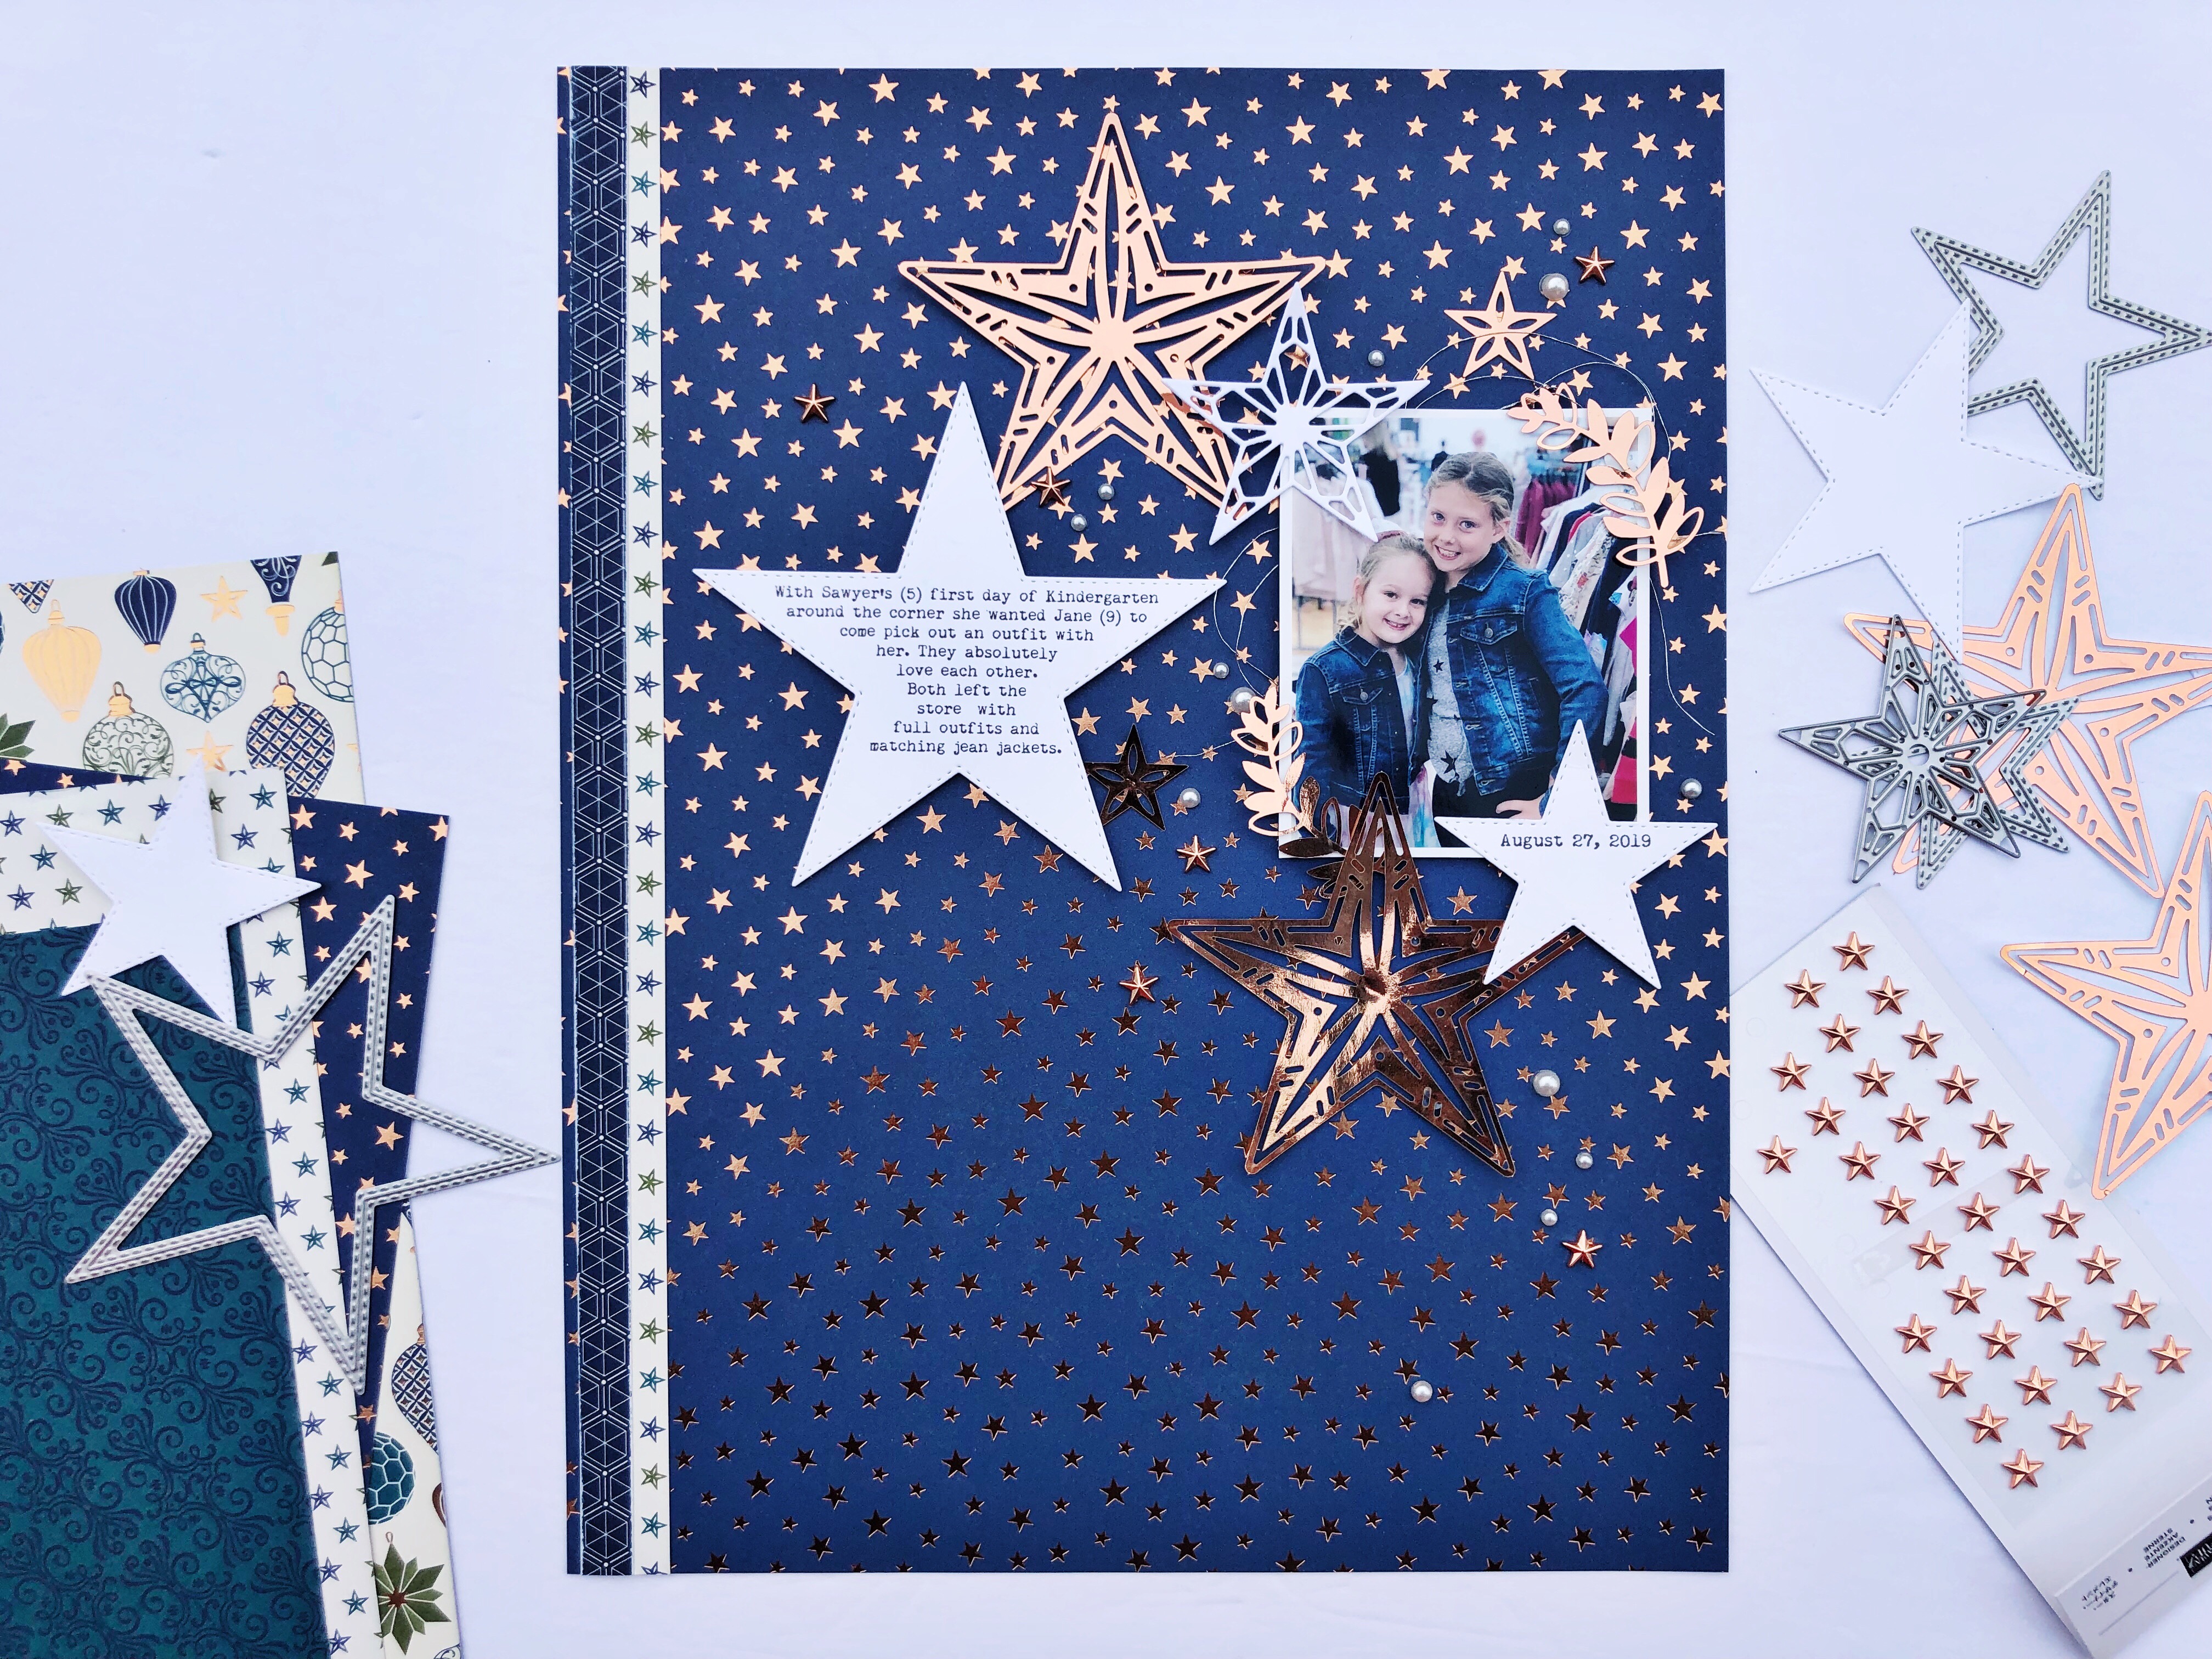 8 1/2 X 11 blue scrapbook layout with stars all over it. Layout featured the Stitched Stars Framelits by Stampin' Up!. Designed by Cathy Caines